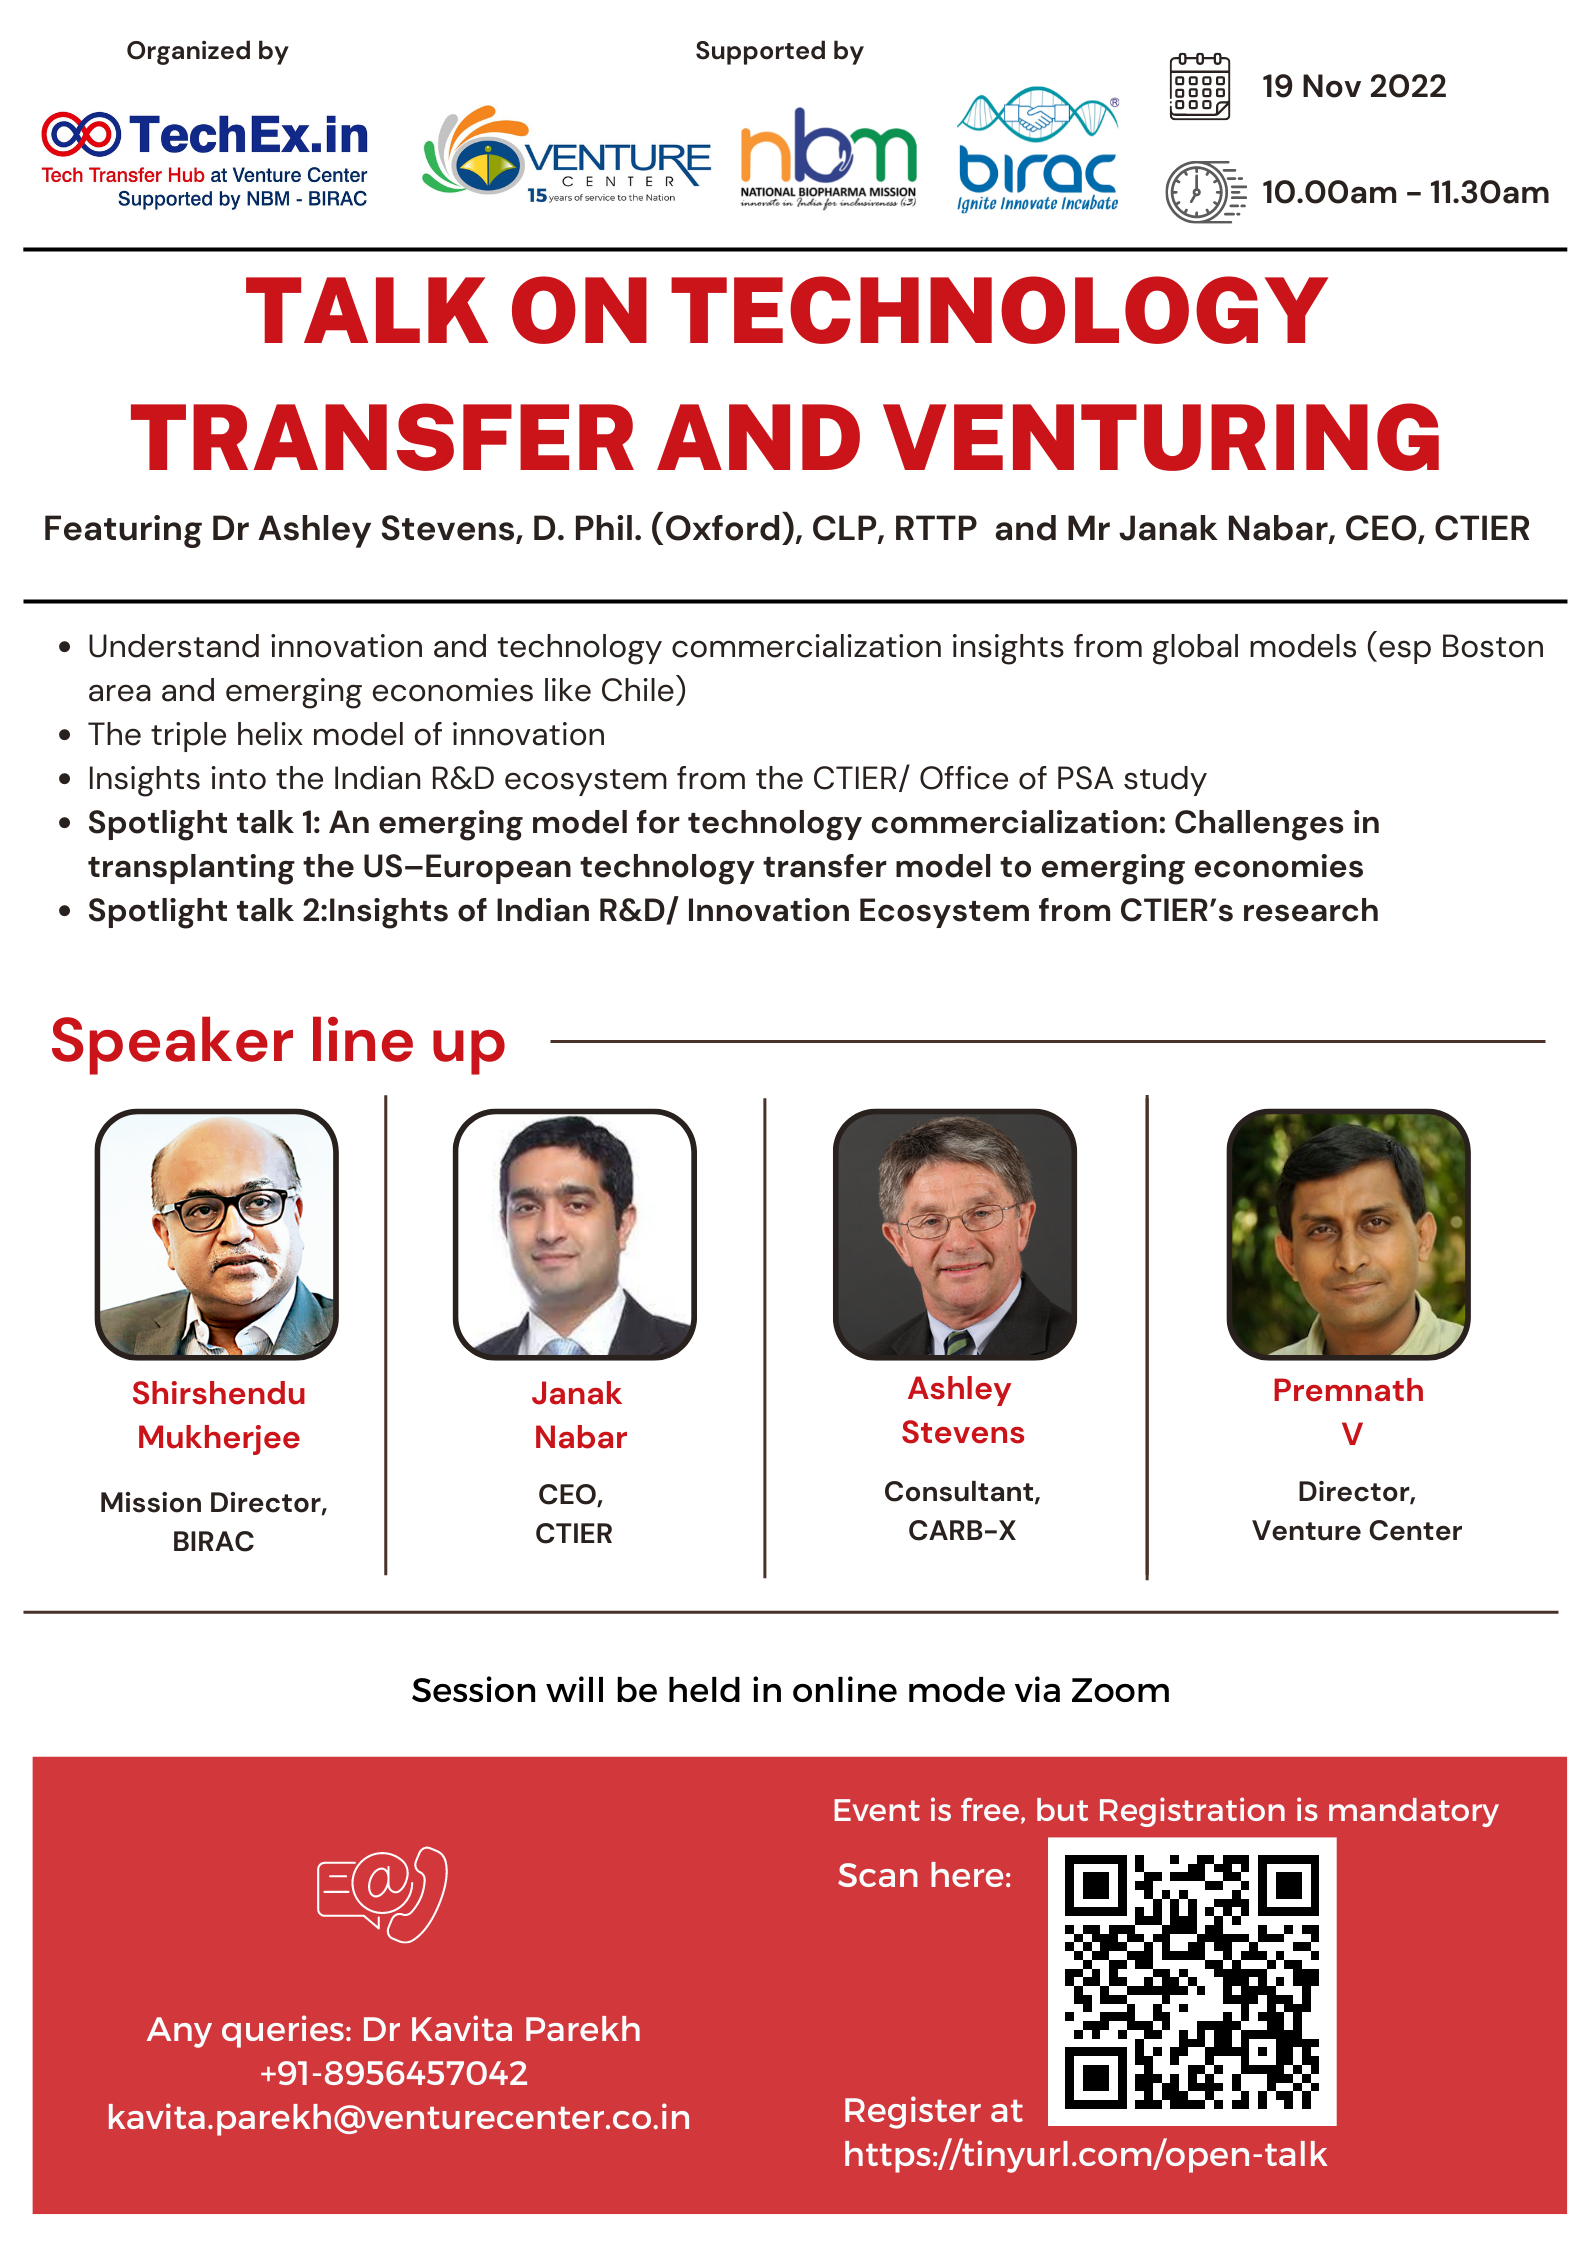 OPEN TO ALL- Talk on Tech Transfer and Venturing